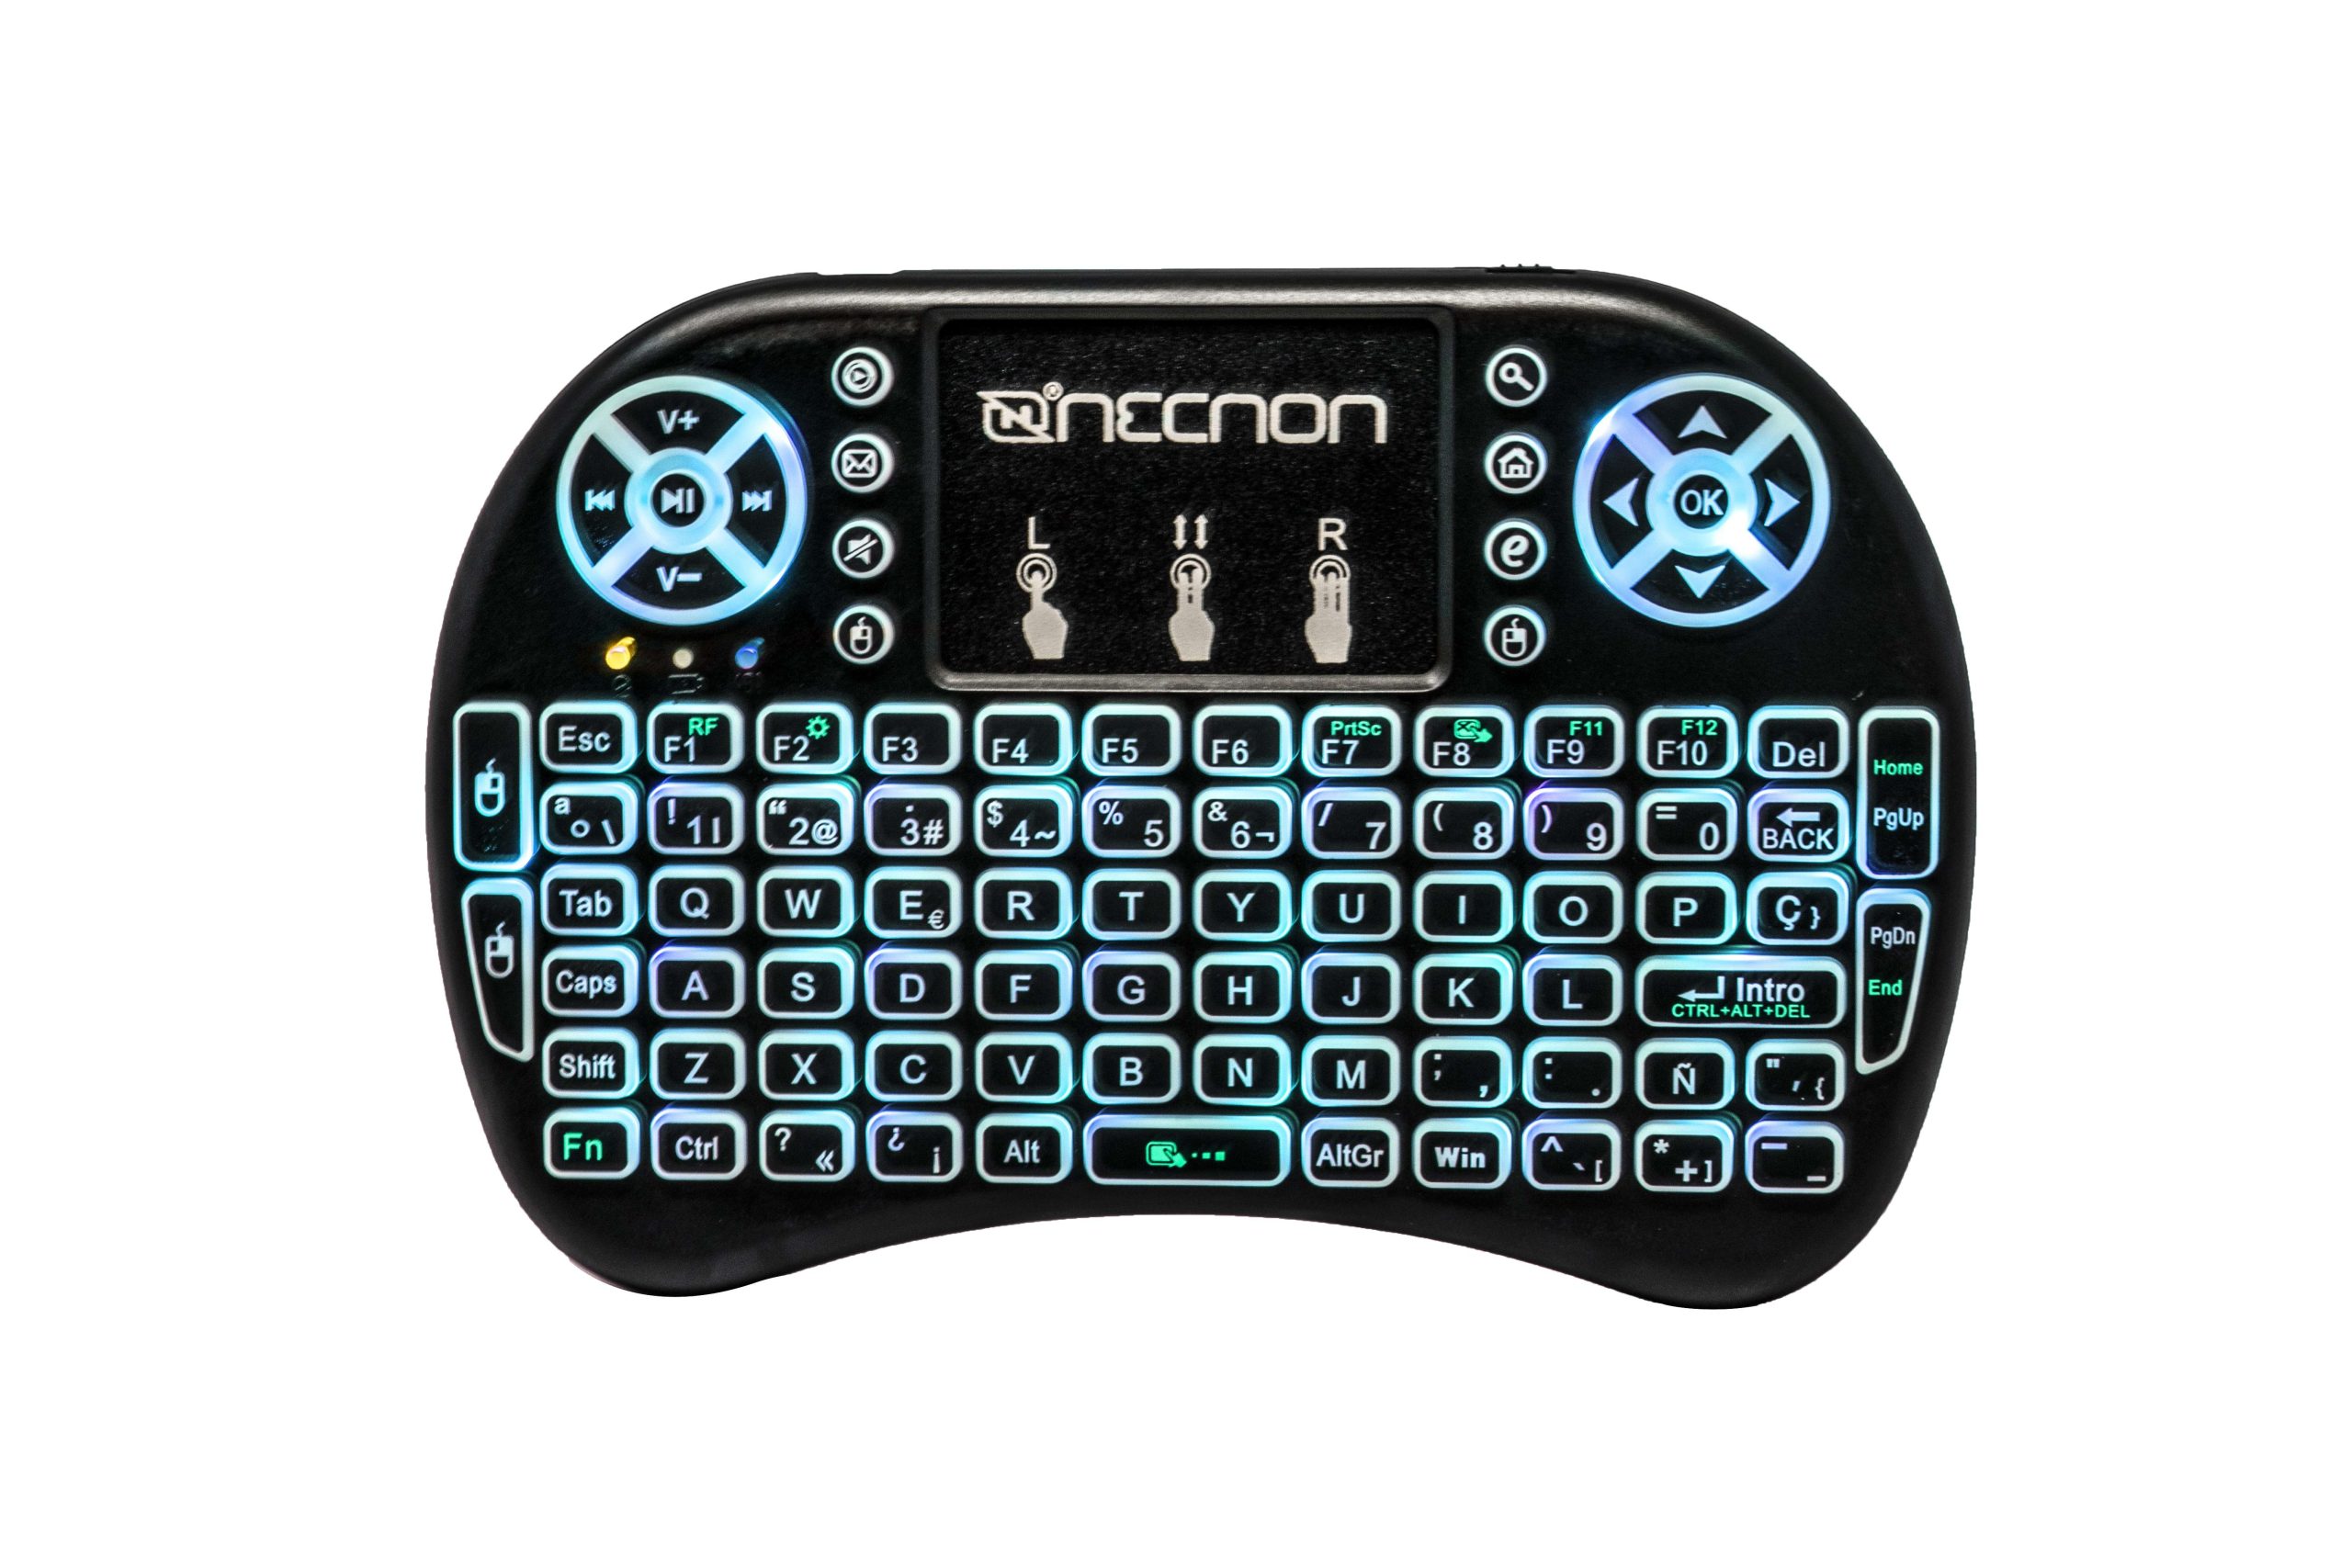 CONTROL REMOTO NCR-01 TOUCH PAD TECLADO QWERTY LED 7 COLORES RECARGABLE TV SMARTPHONE TV BOX NEGRO -